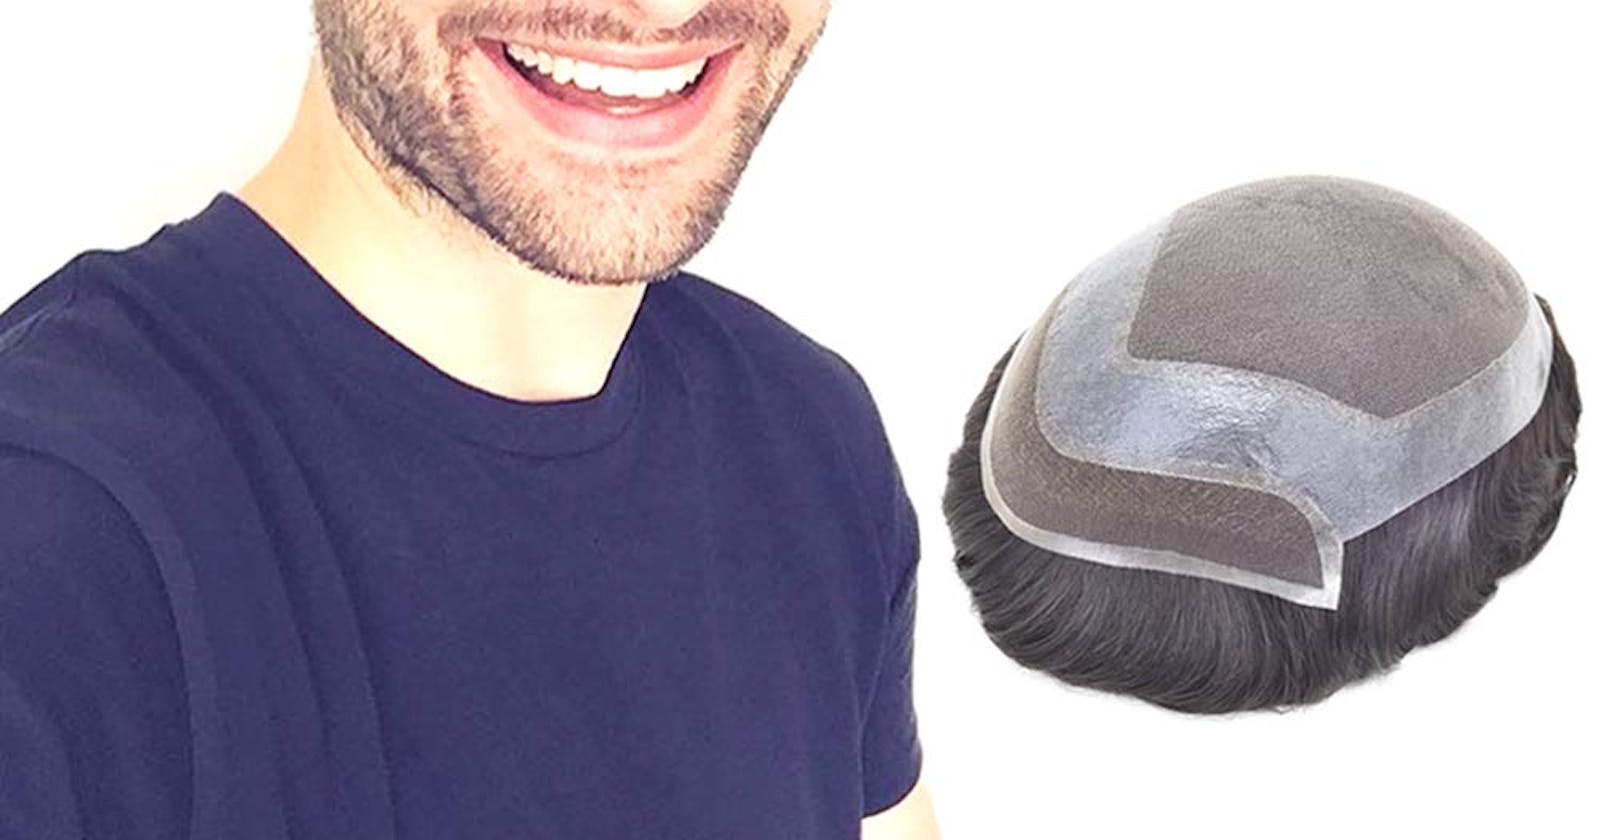 Instantly change your look and style with mens hairpieces